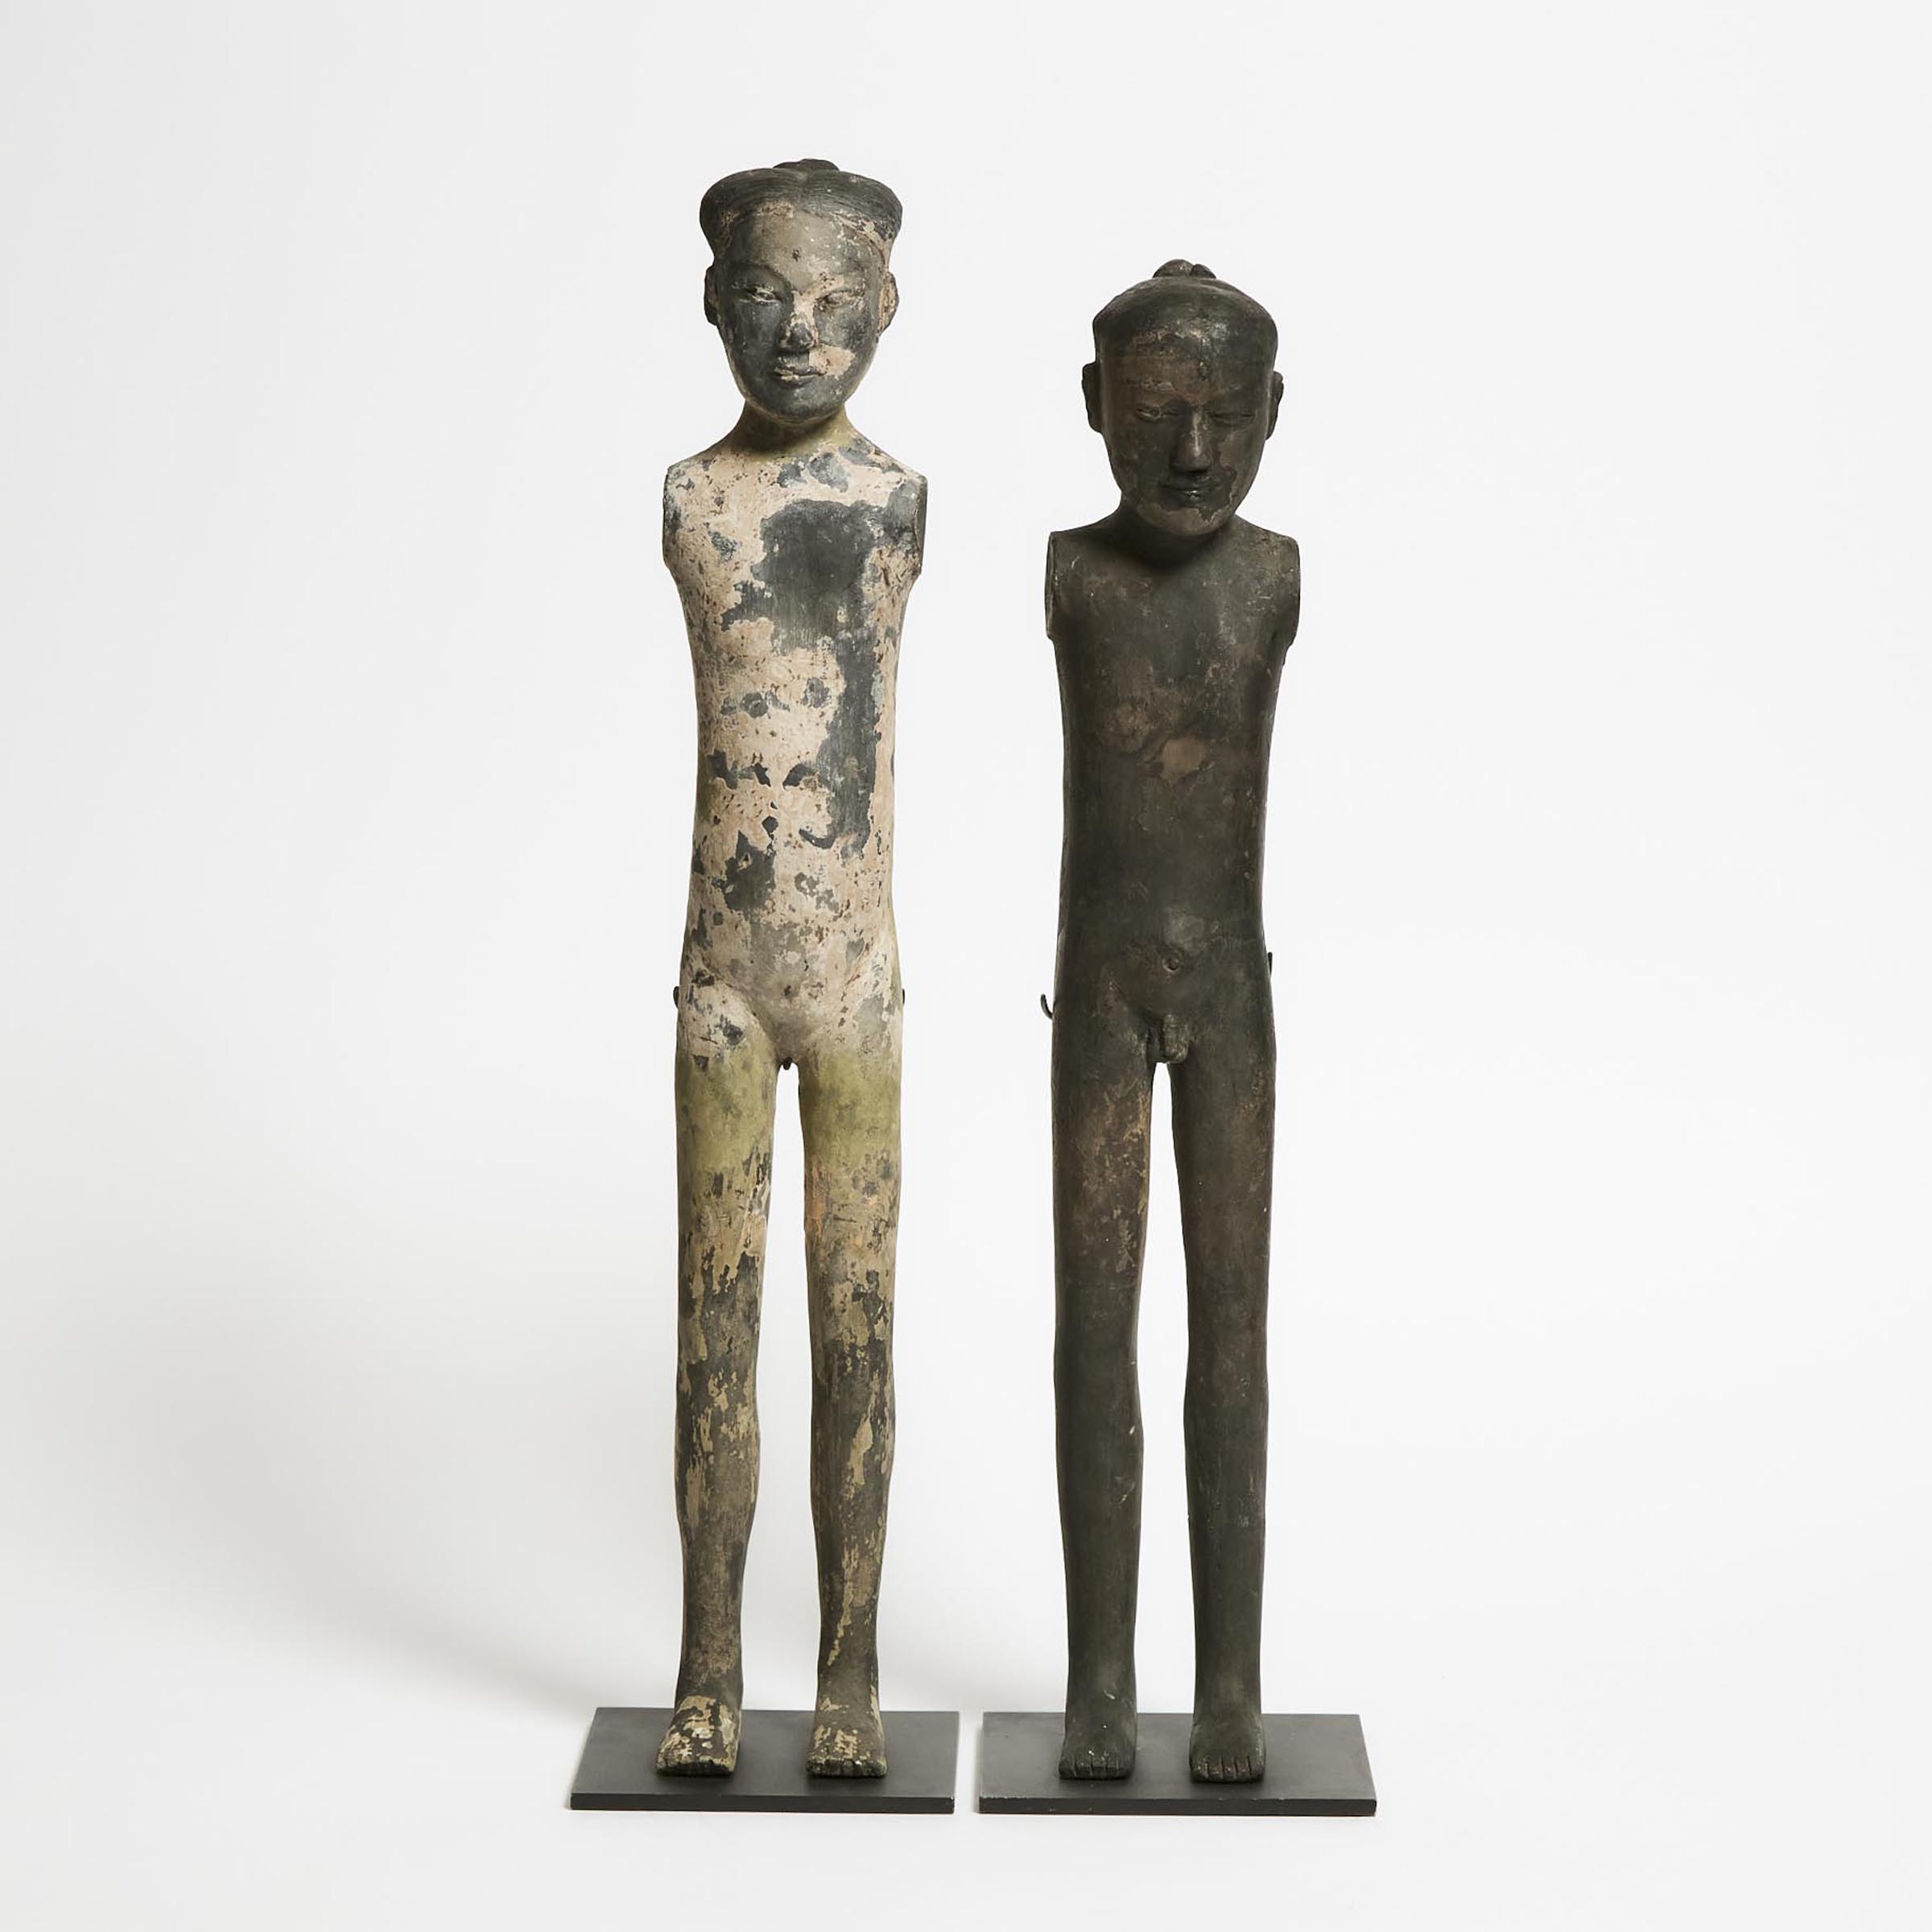 Two Pottery Figures of a Female